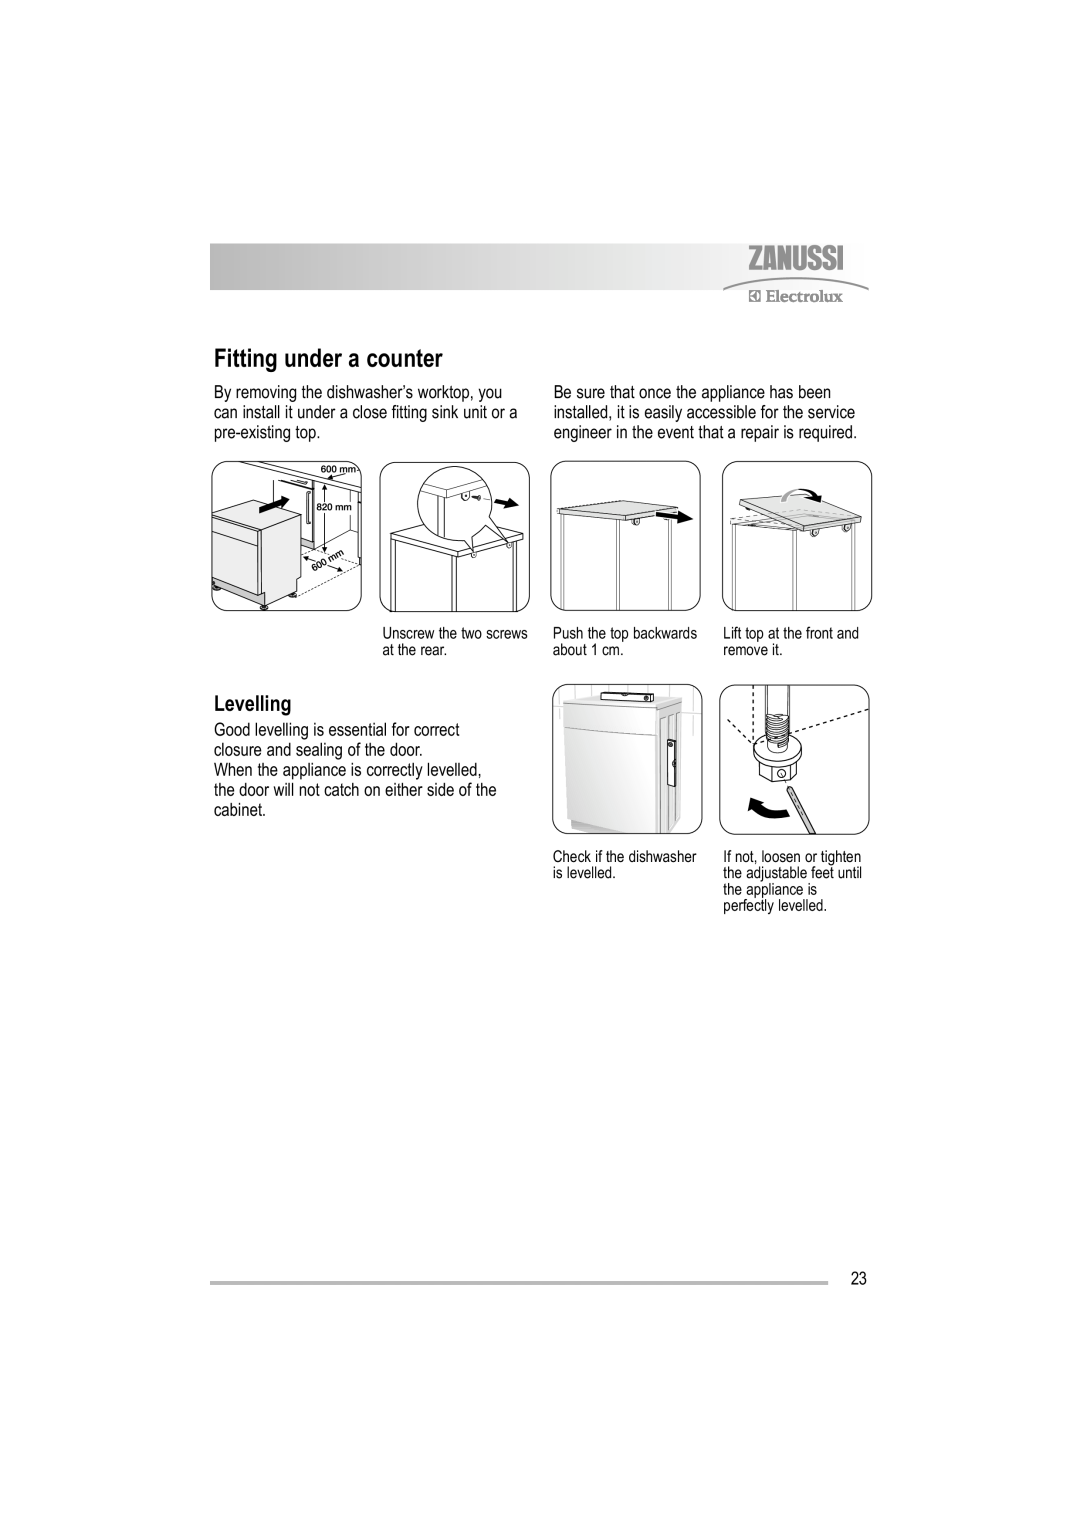 Zanussi ZDF 221 user manual Fitting under a counter, Levelling 